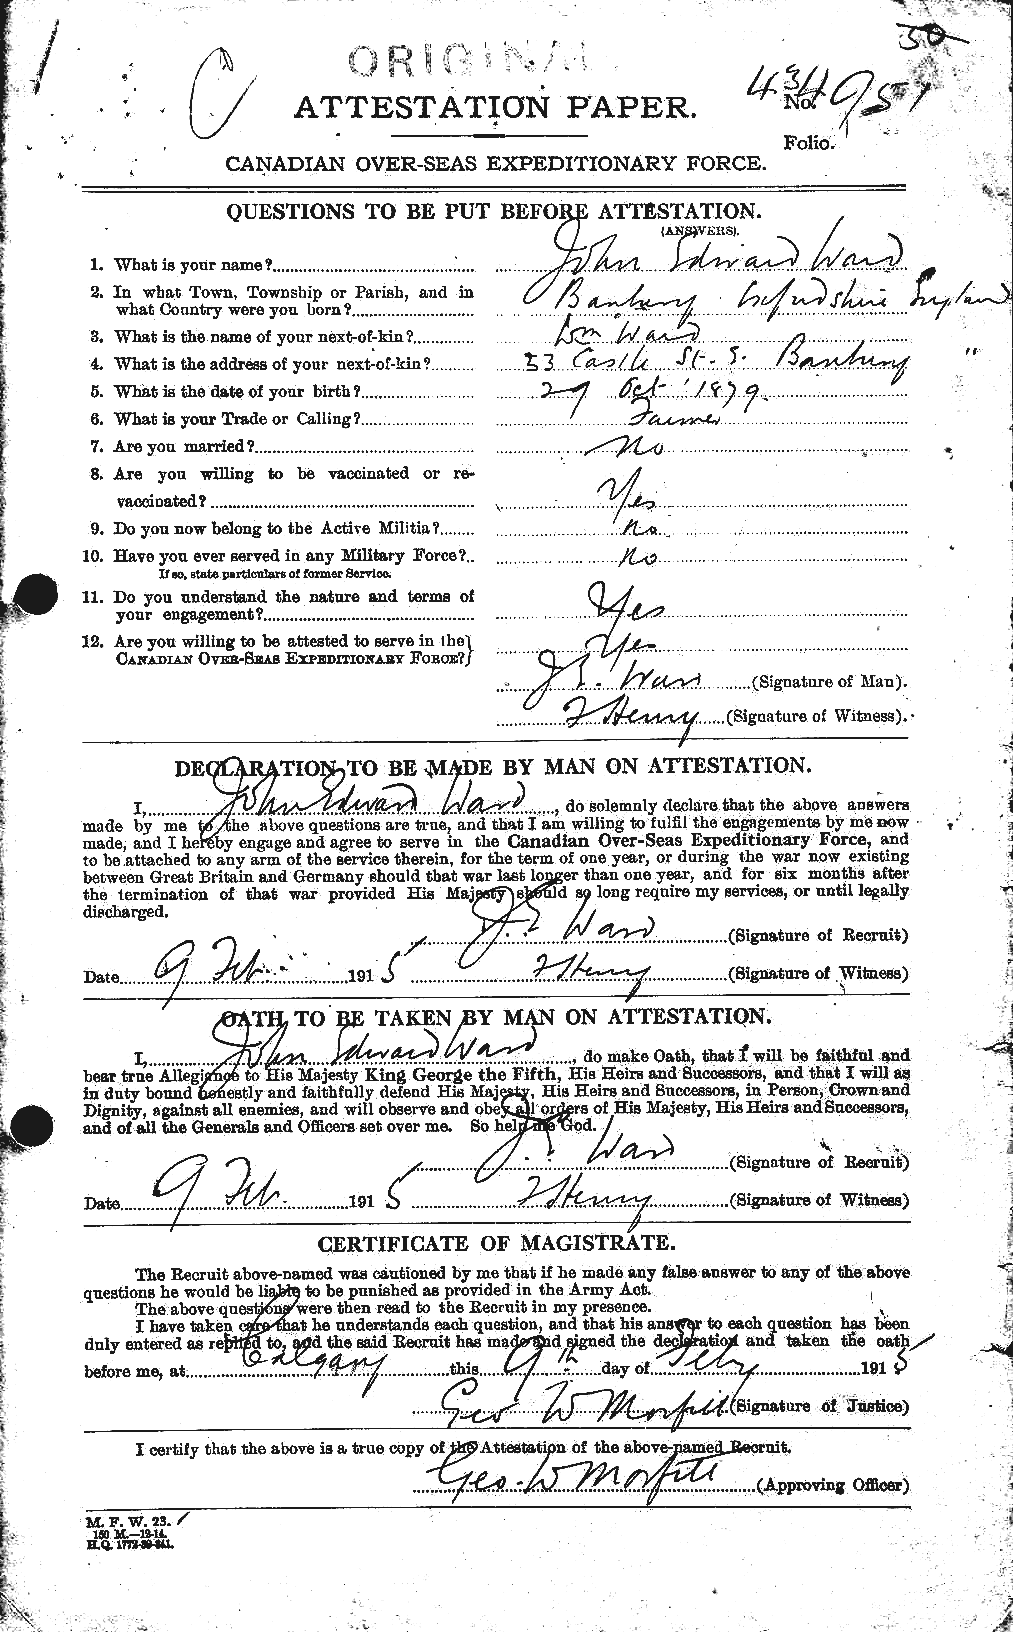 Personnel Records of the First World War - CEF 659517a